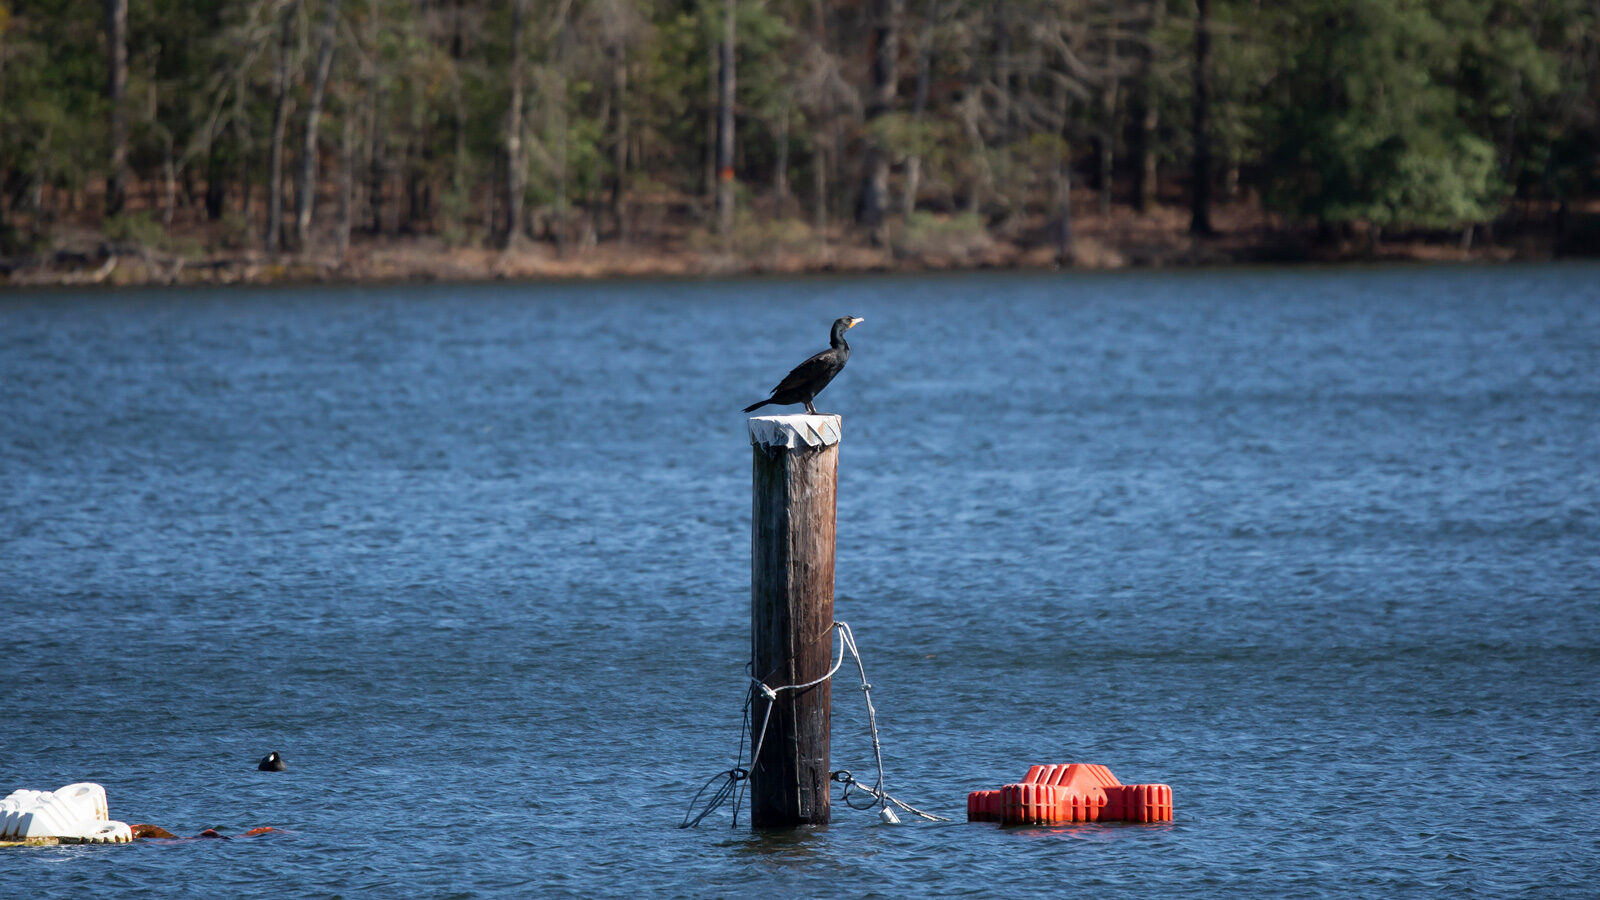 Double-crested cormorant perched on a wooden pole in water